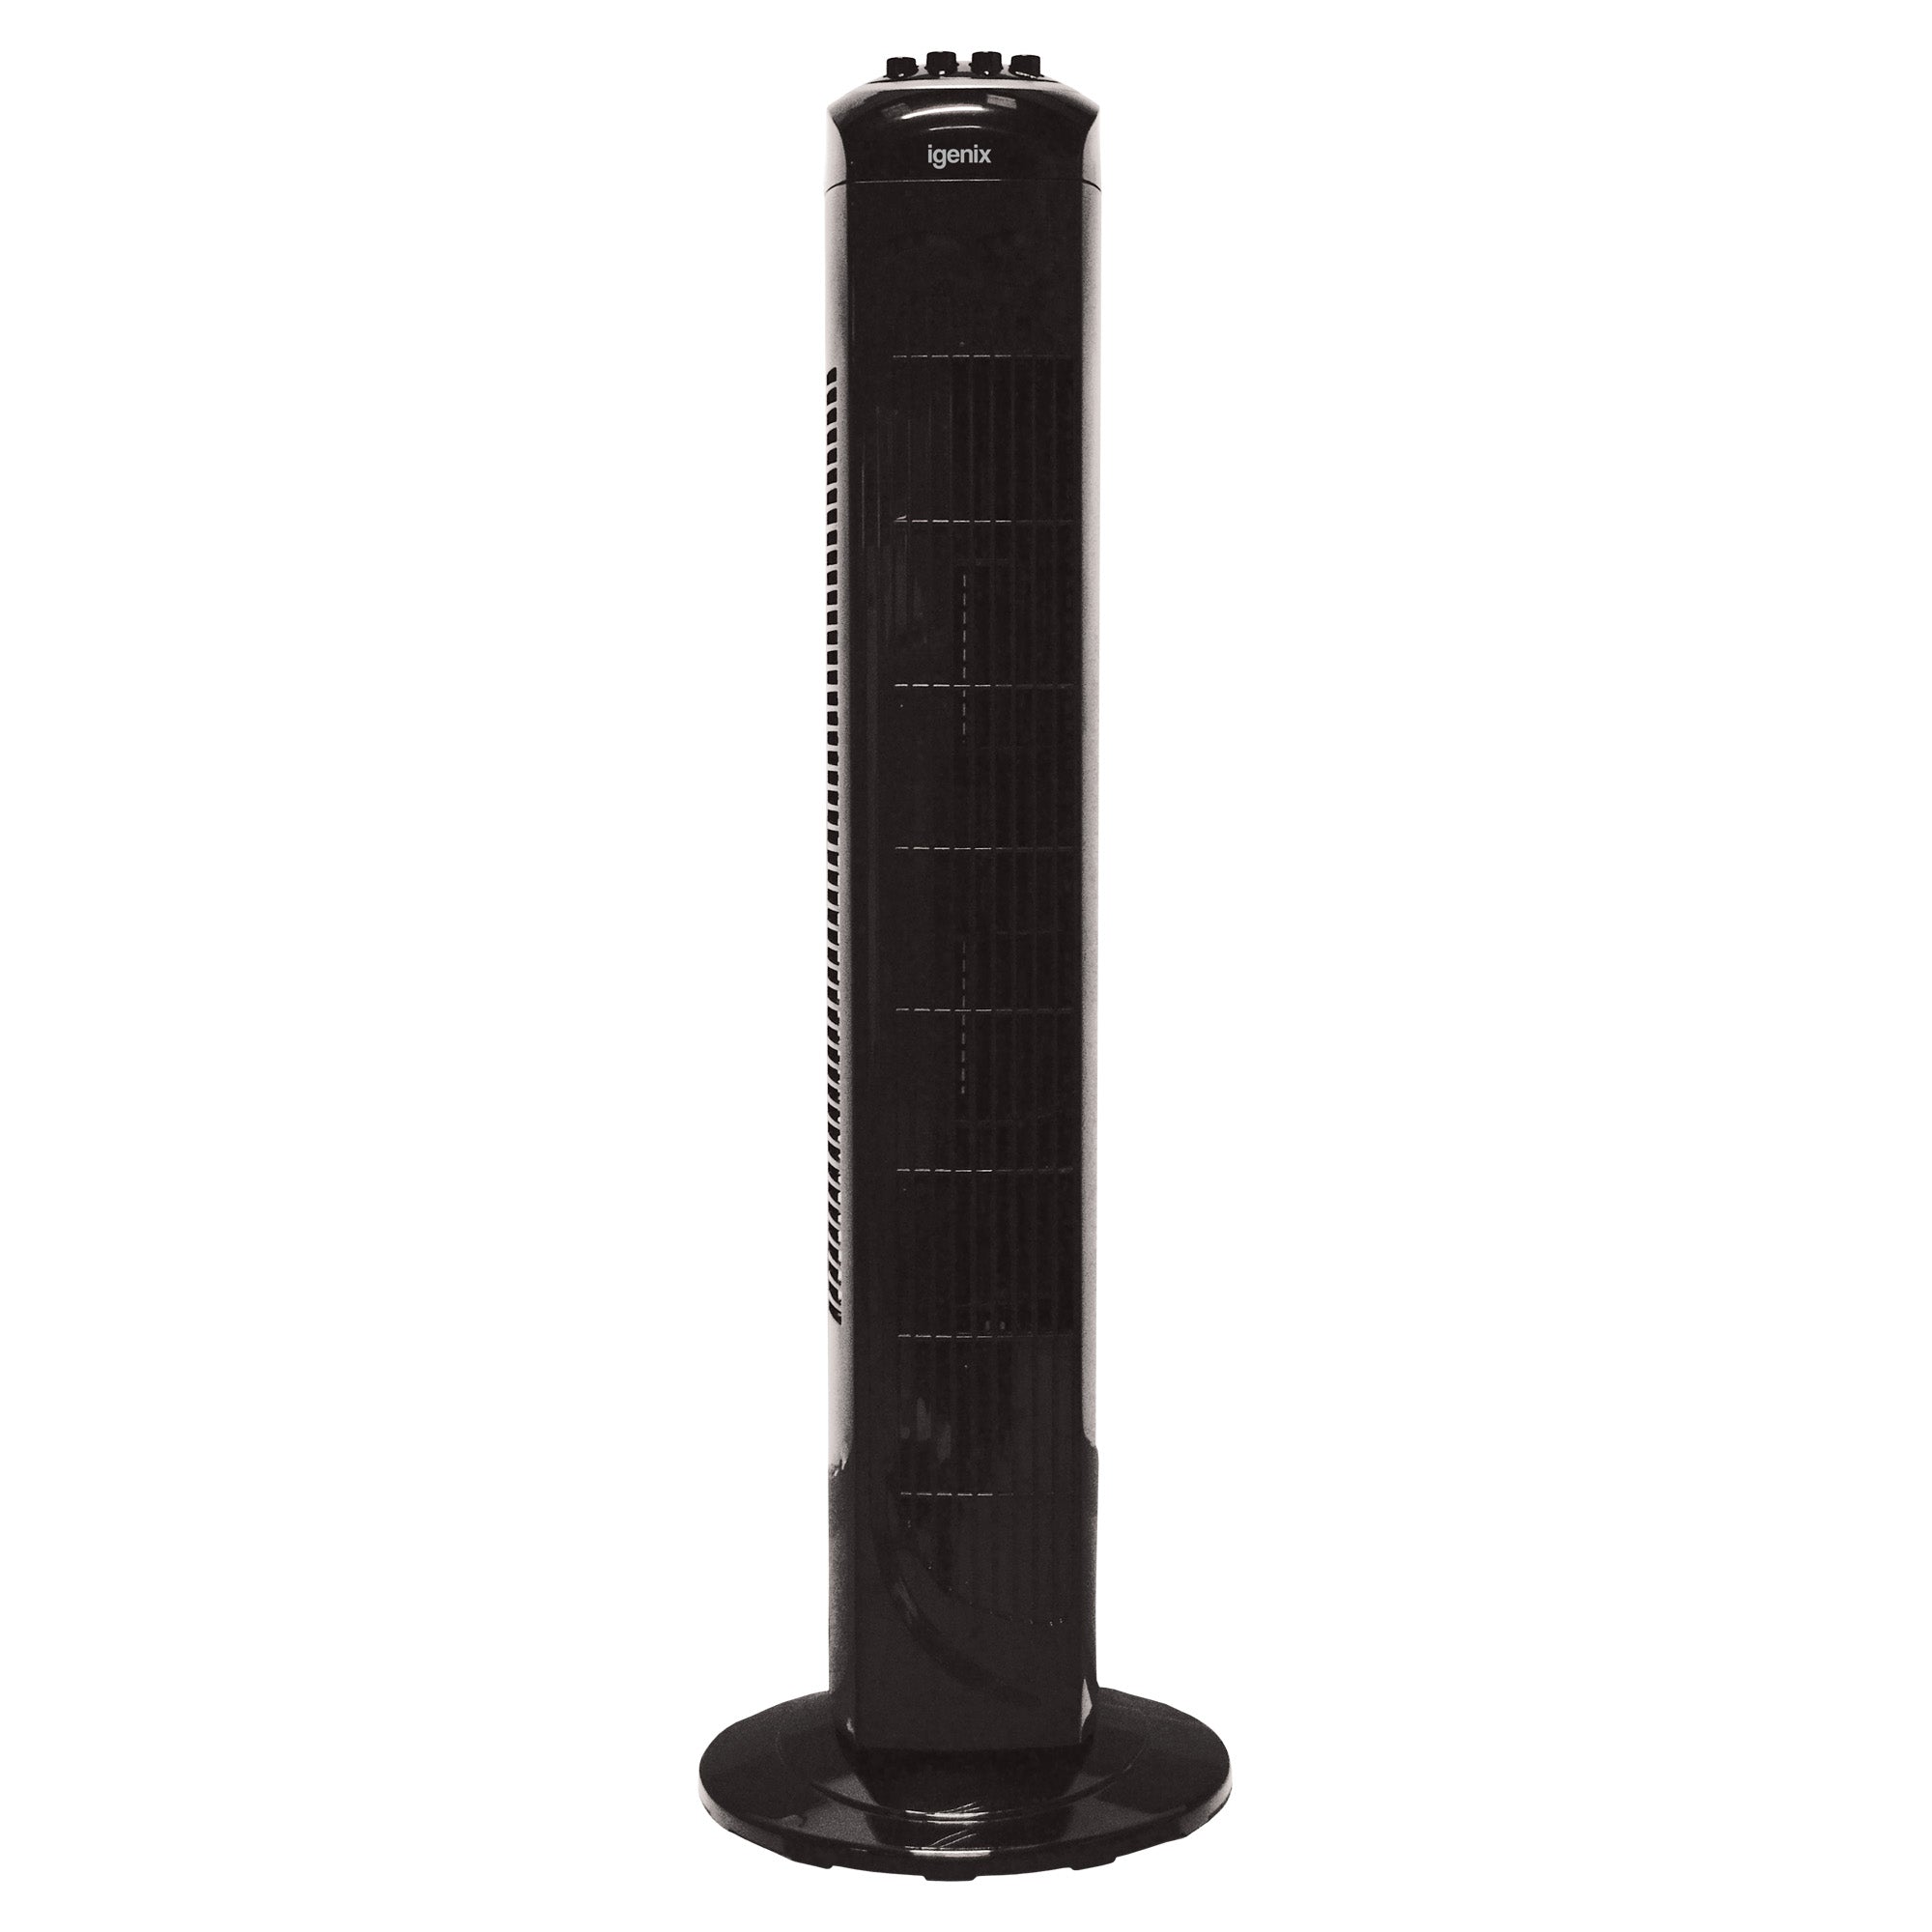 Tower Fan, Oscillating, 2 Hour Timer, 30 Inch, Black